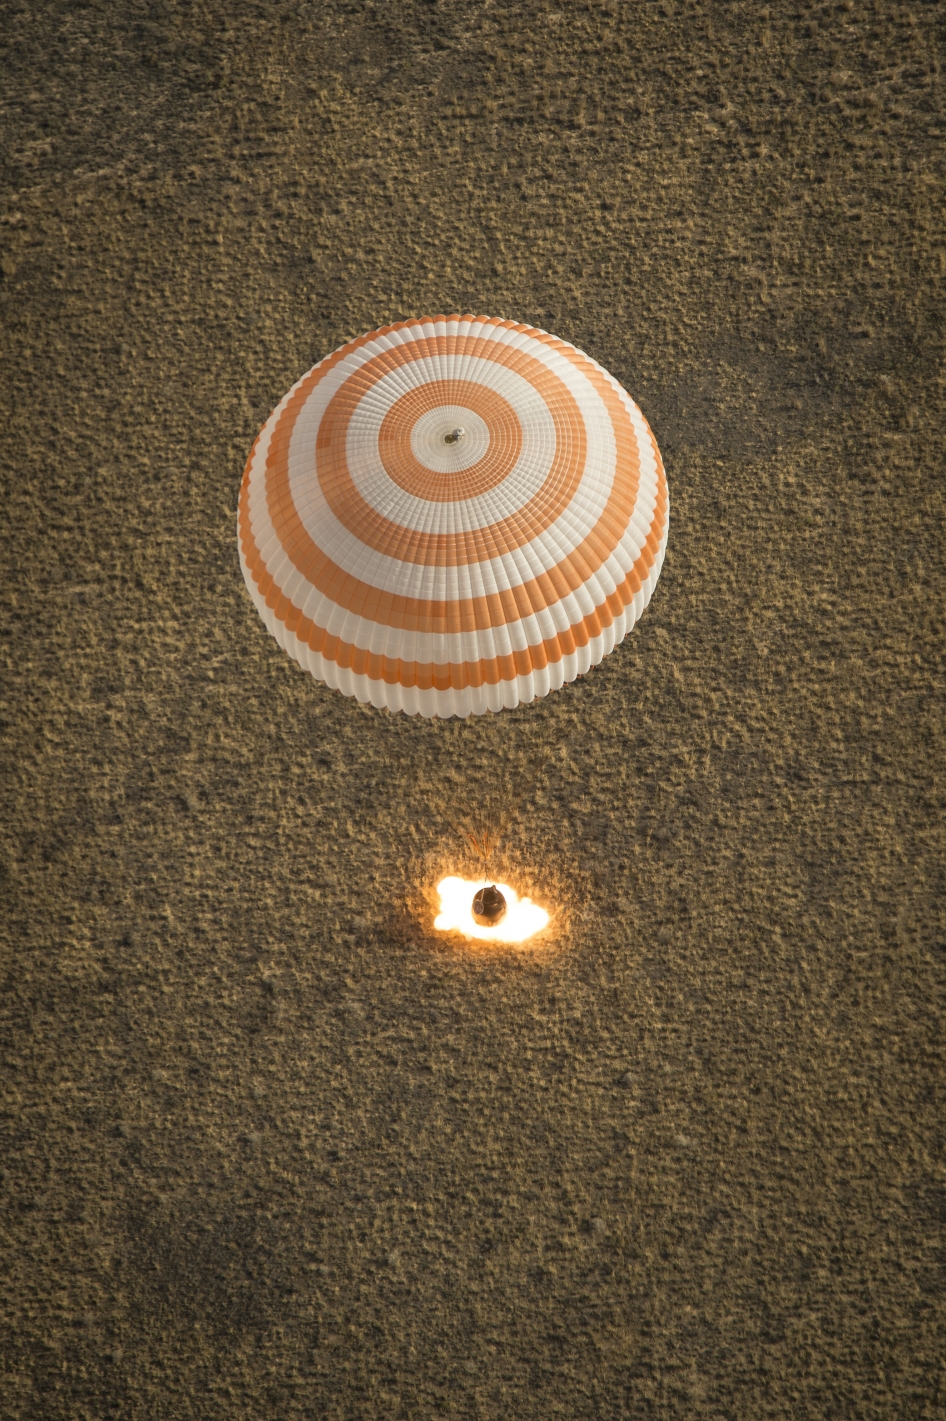 ISS Crew Members ‘Flew Blind’ On Their Way Back To Earth